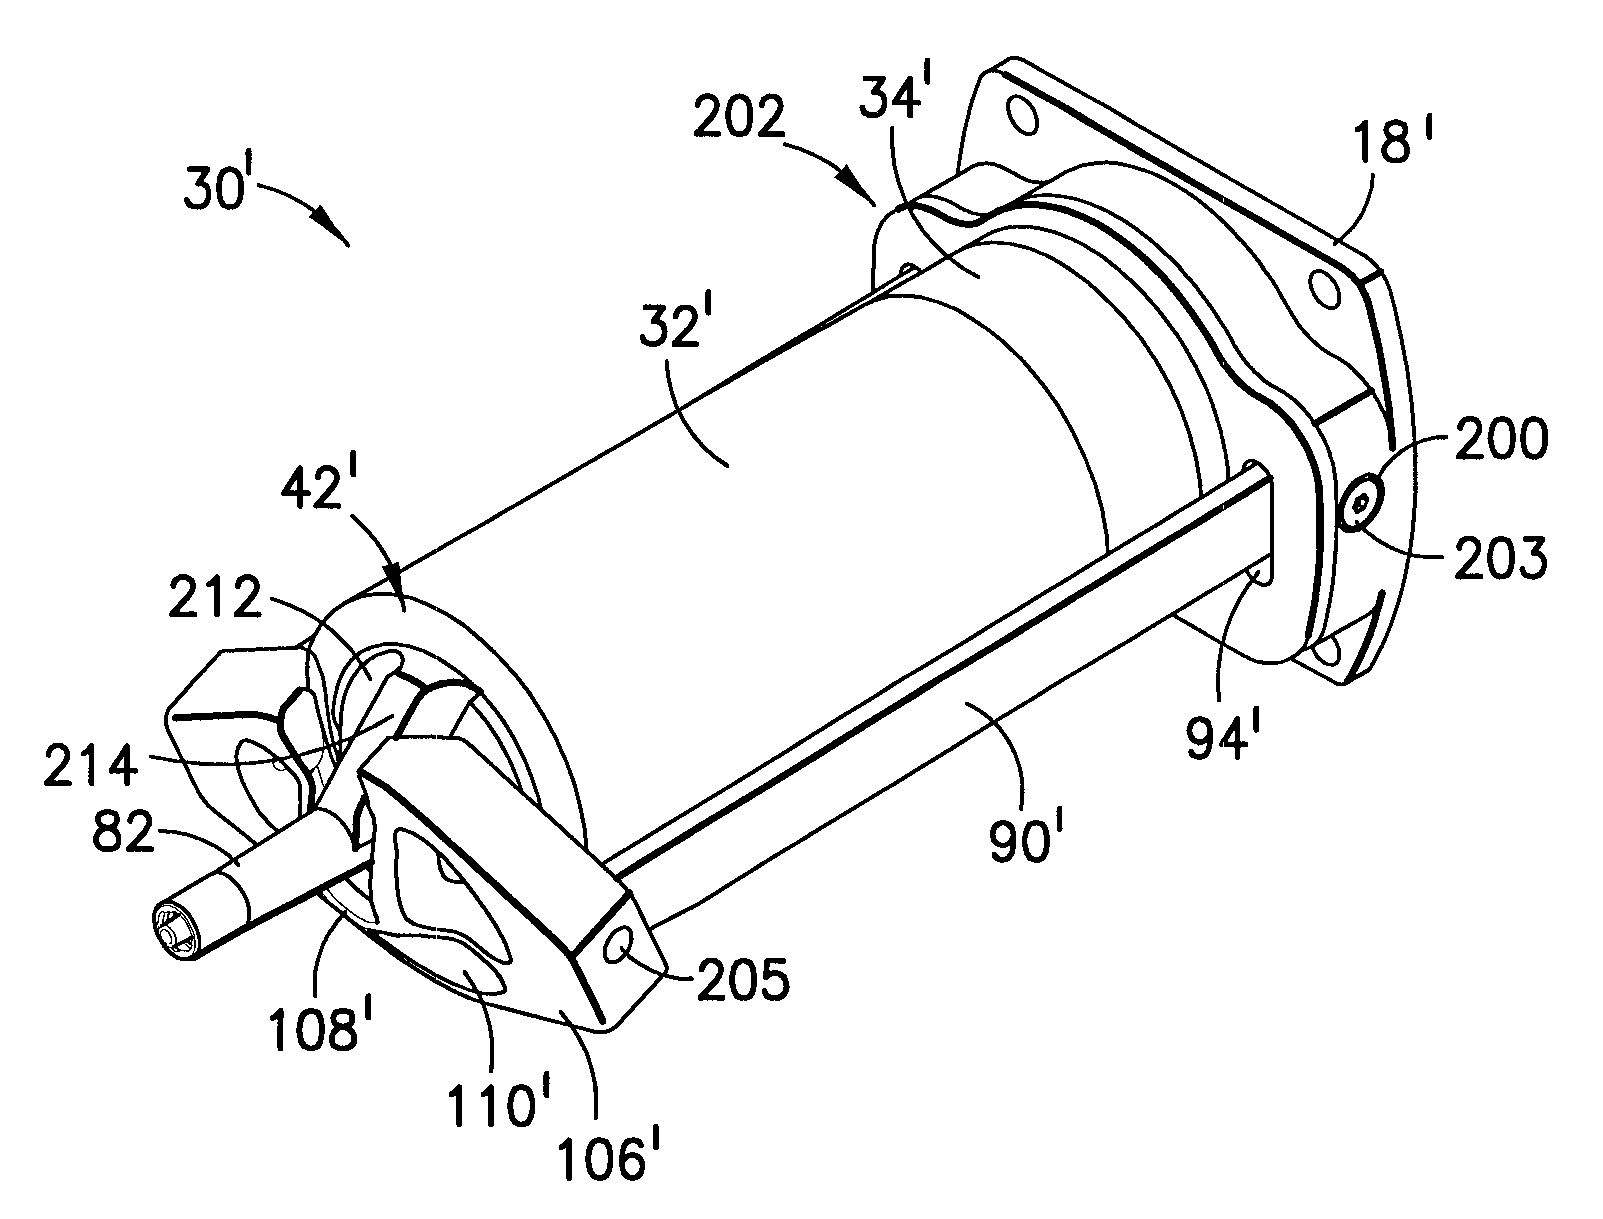 Fluid injection system and pressure jacket assembly with syringe illumination